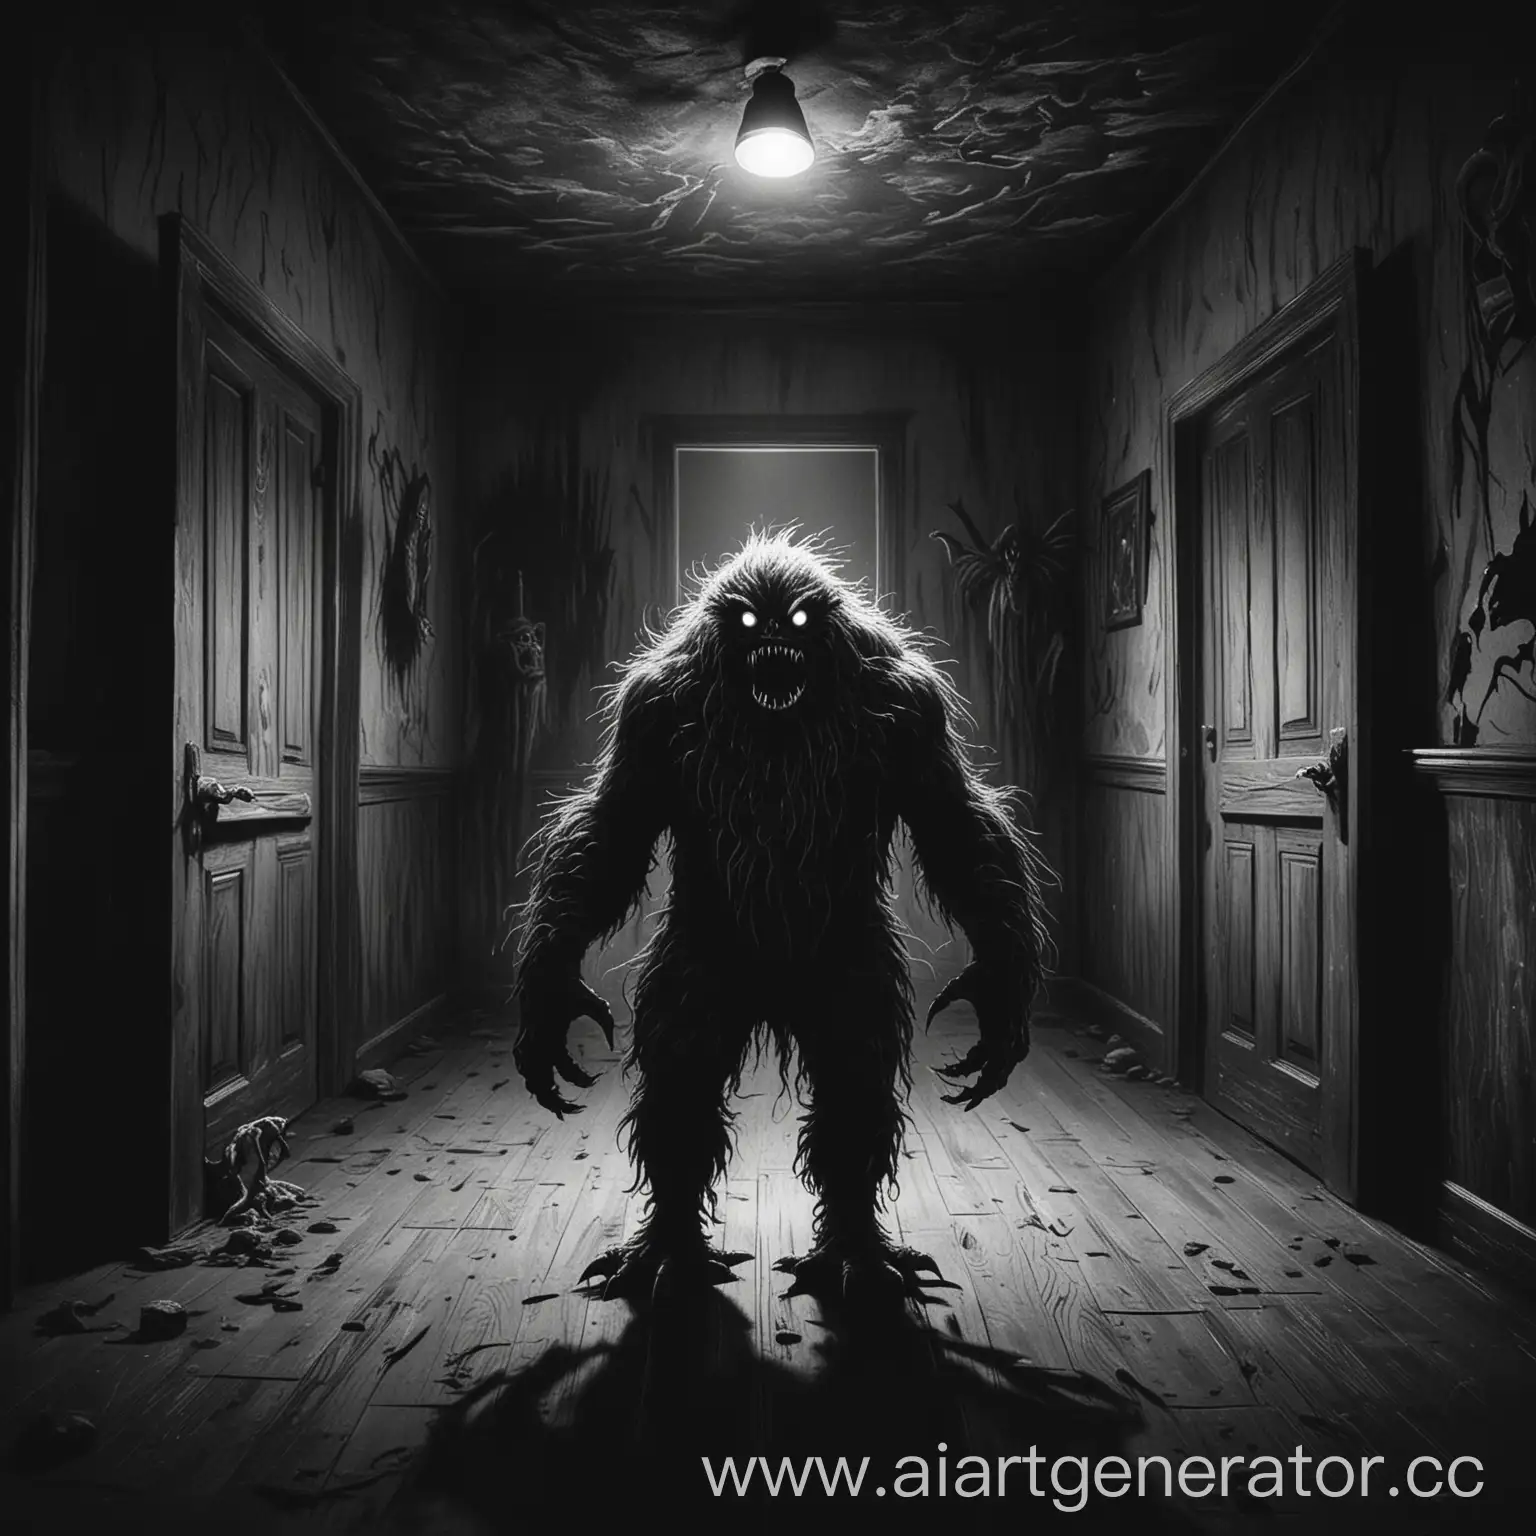 Nocturnal-Monster-in-Dark-Room-Eerie-Black-and-White-Drawing